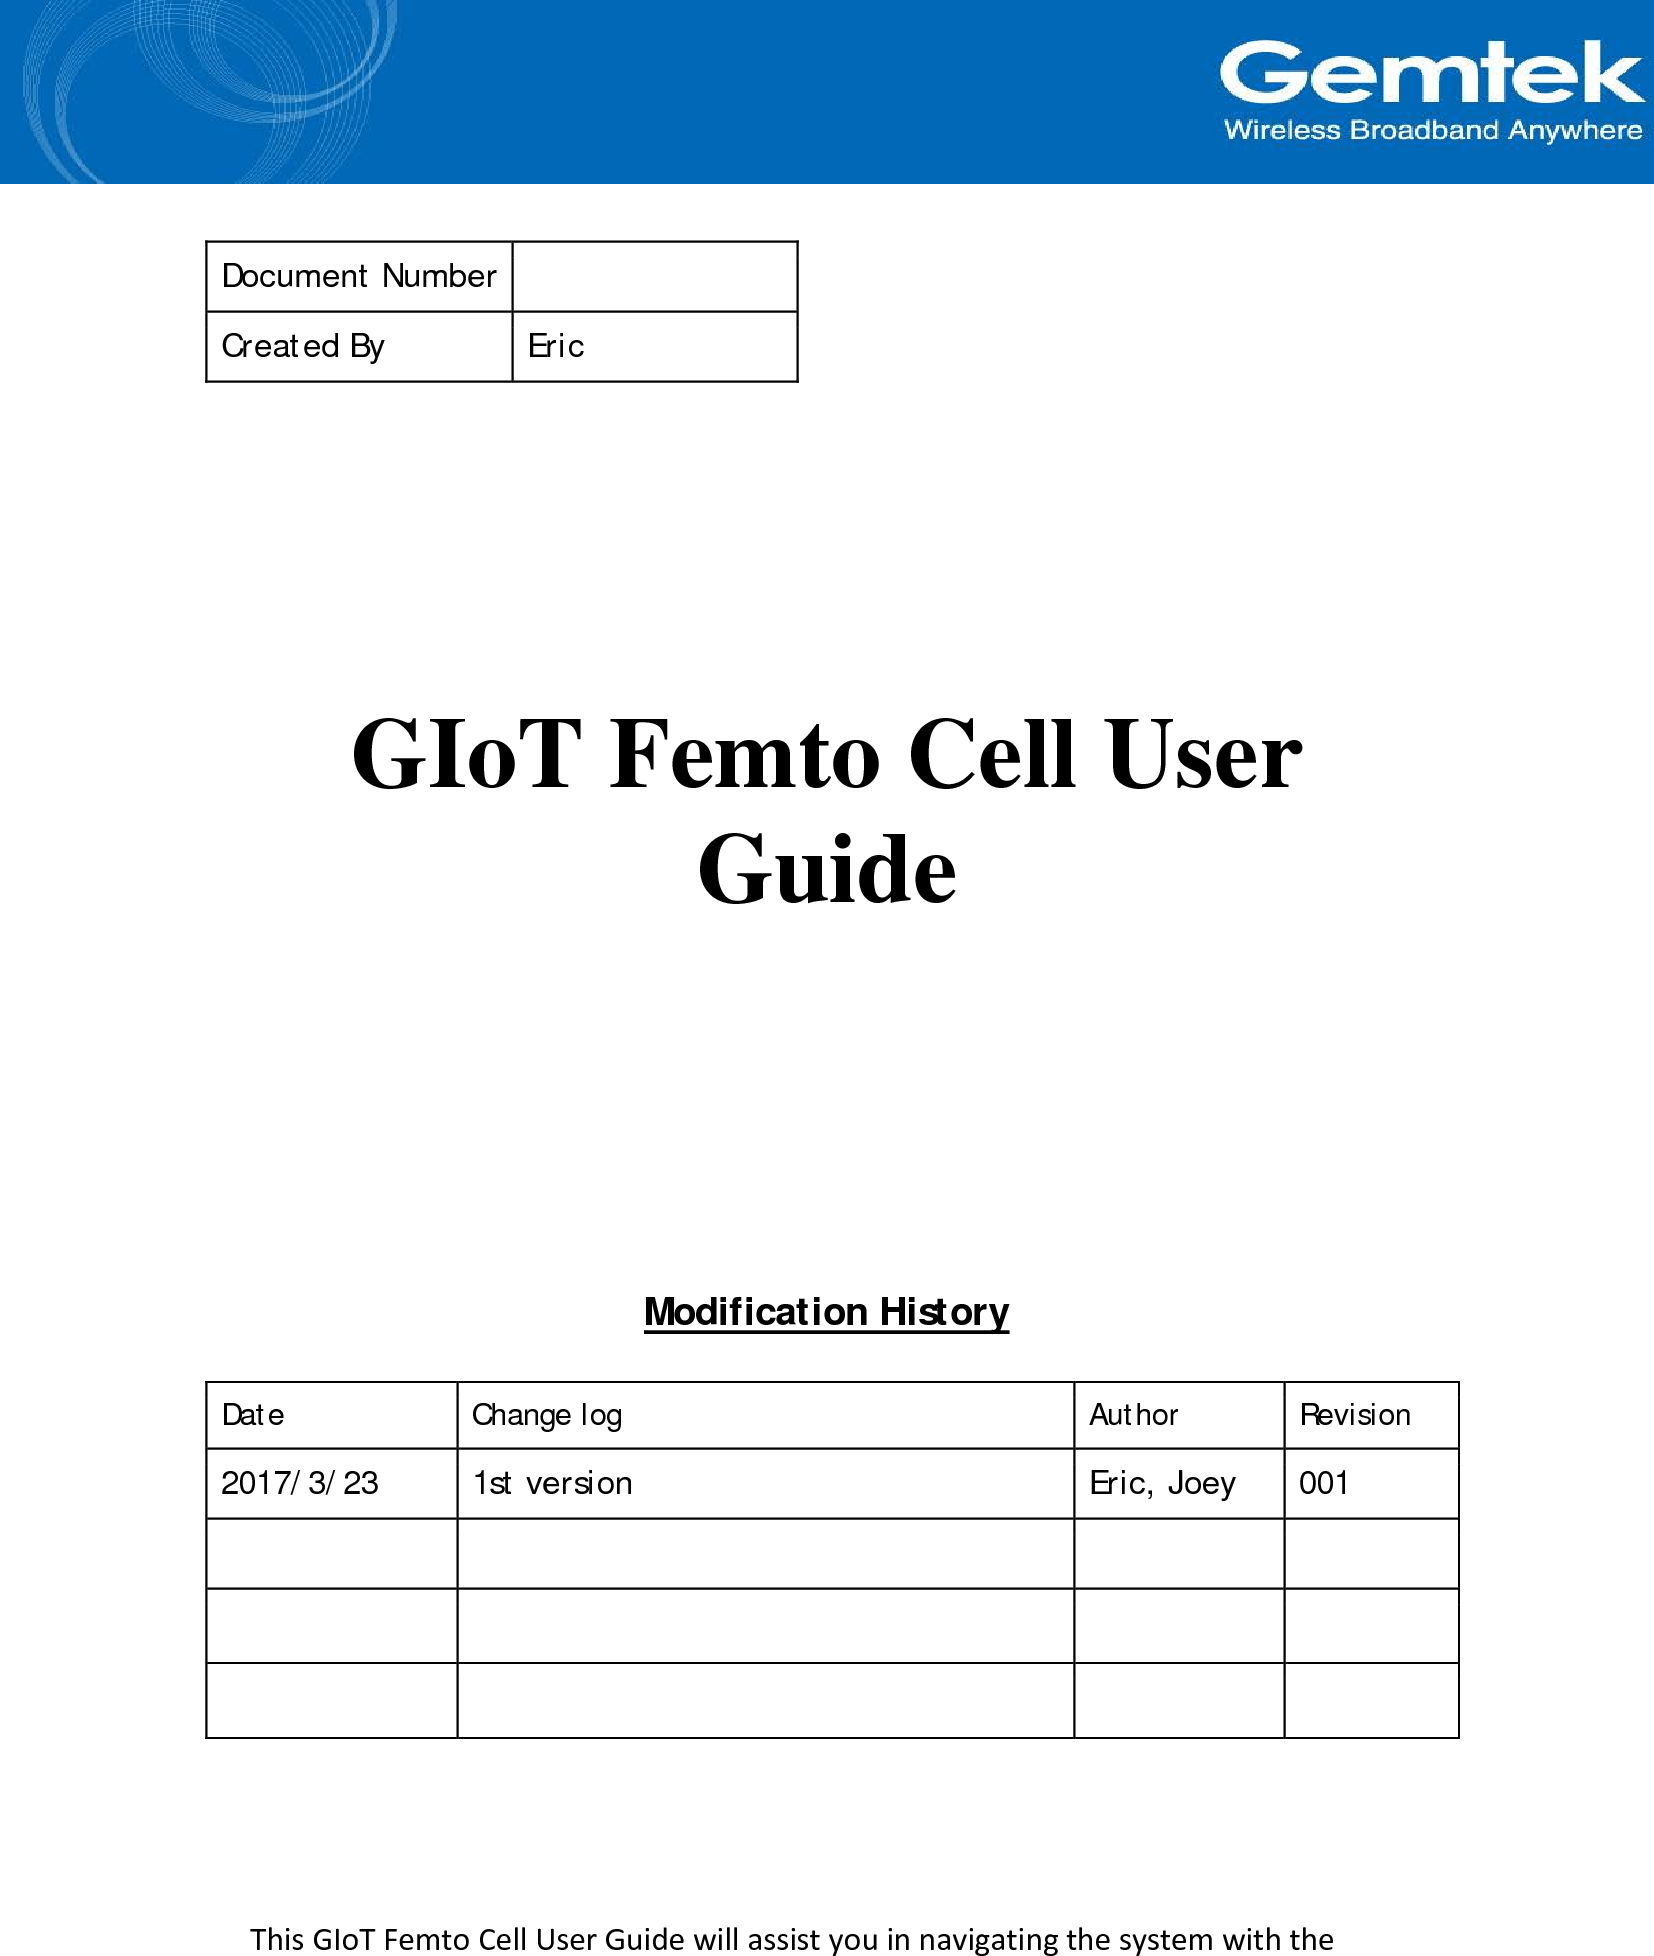    Document Number  Created By Eric       GIoT Femto Cell User Guide          Modification History  Date Change log Author Revision 2017/3/23 1st version Eric, Joey 001                      This GIoT Femto Cell User Guide will assist you in navigating the system with the 